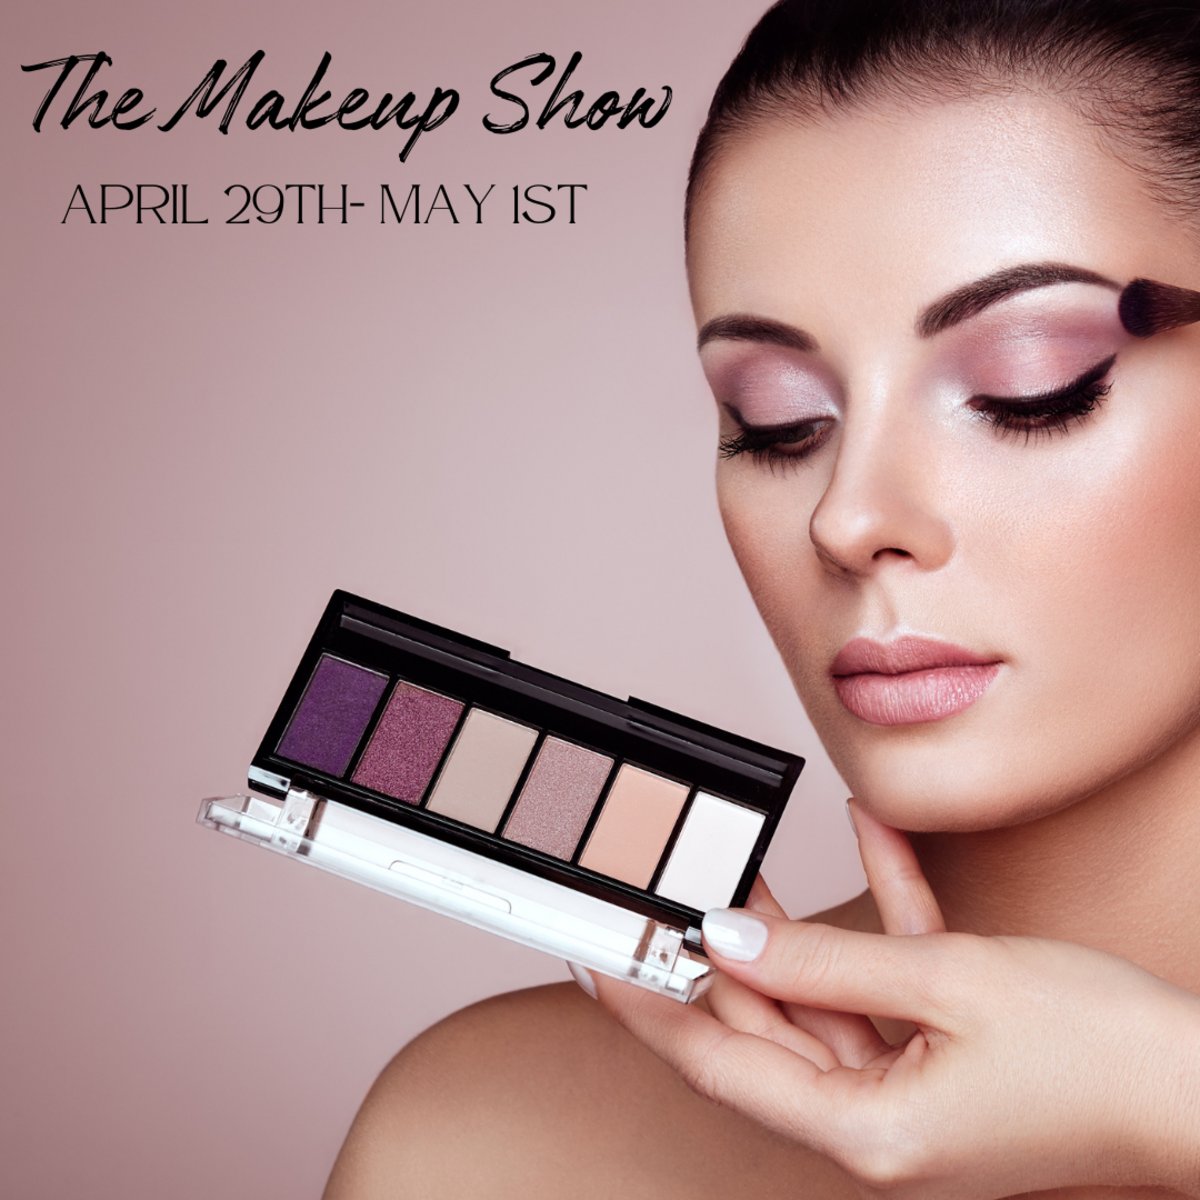 Get ready for the most #influentialartists and brands in #beauty to come together under one roof at the #MakeupShow from April 29th- May 1st. Attend seminars, see demonstrations, and buy the latest products. Get tickets from: bit.ly/3m6LuKX